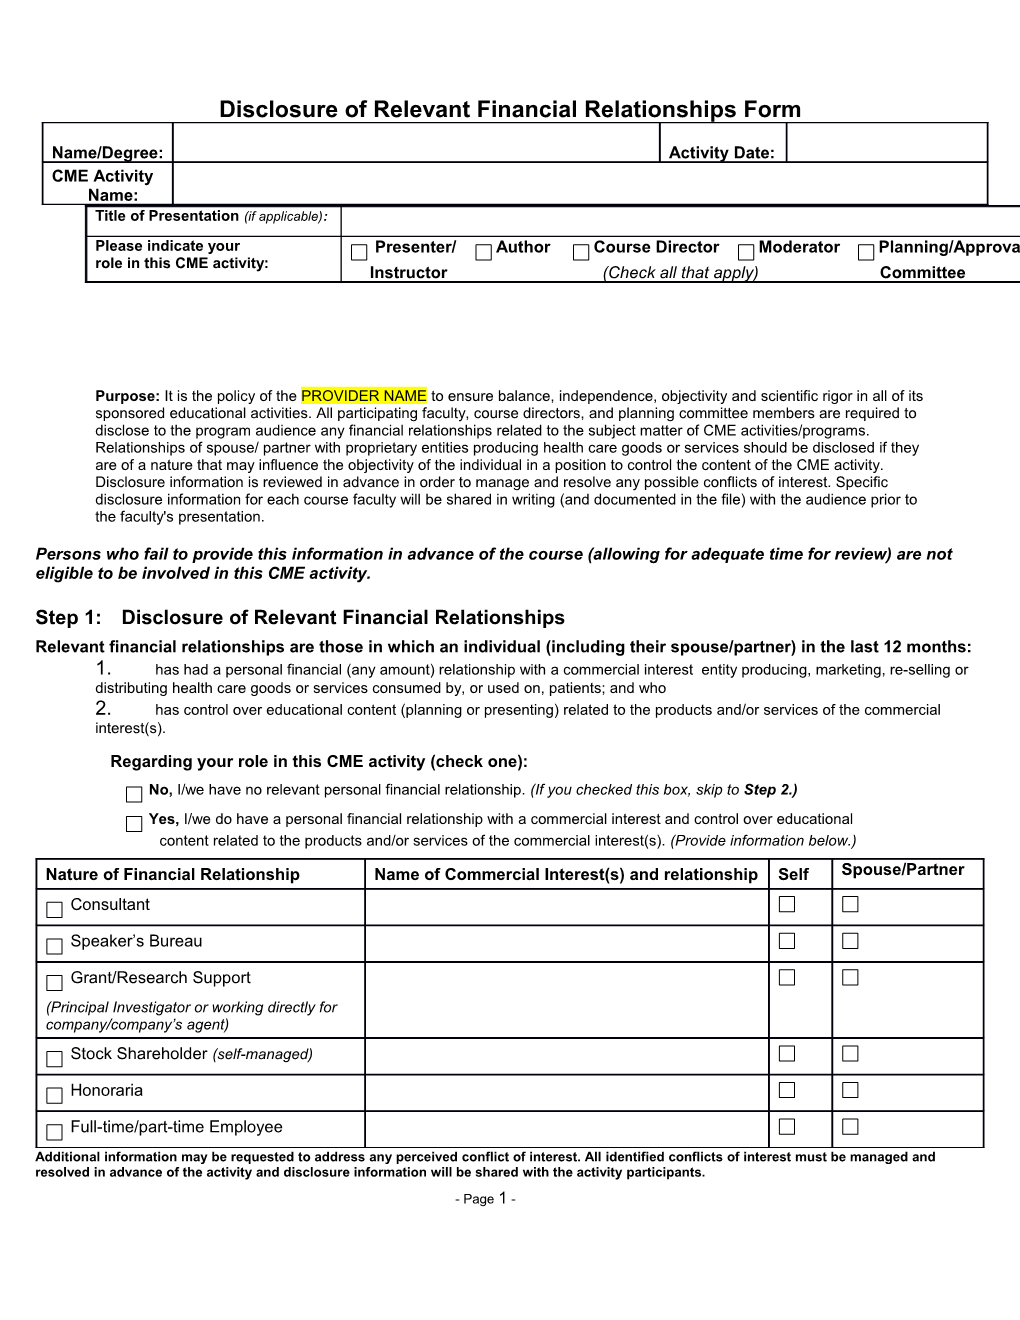 Disclosure of Relevant Financial Relationships Form